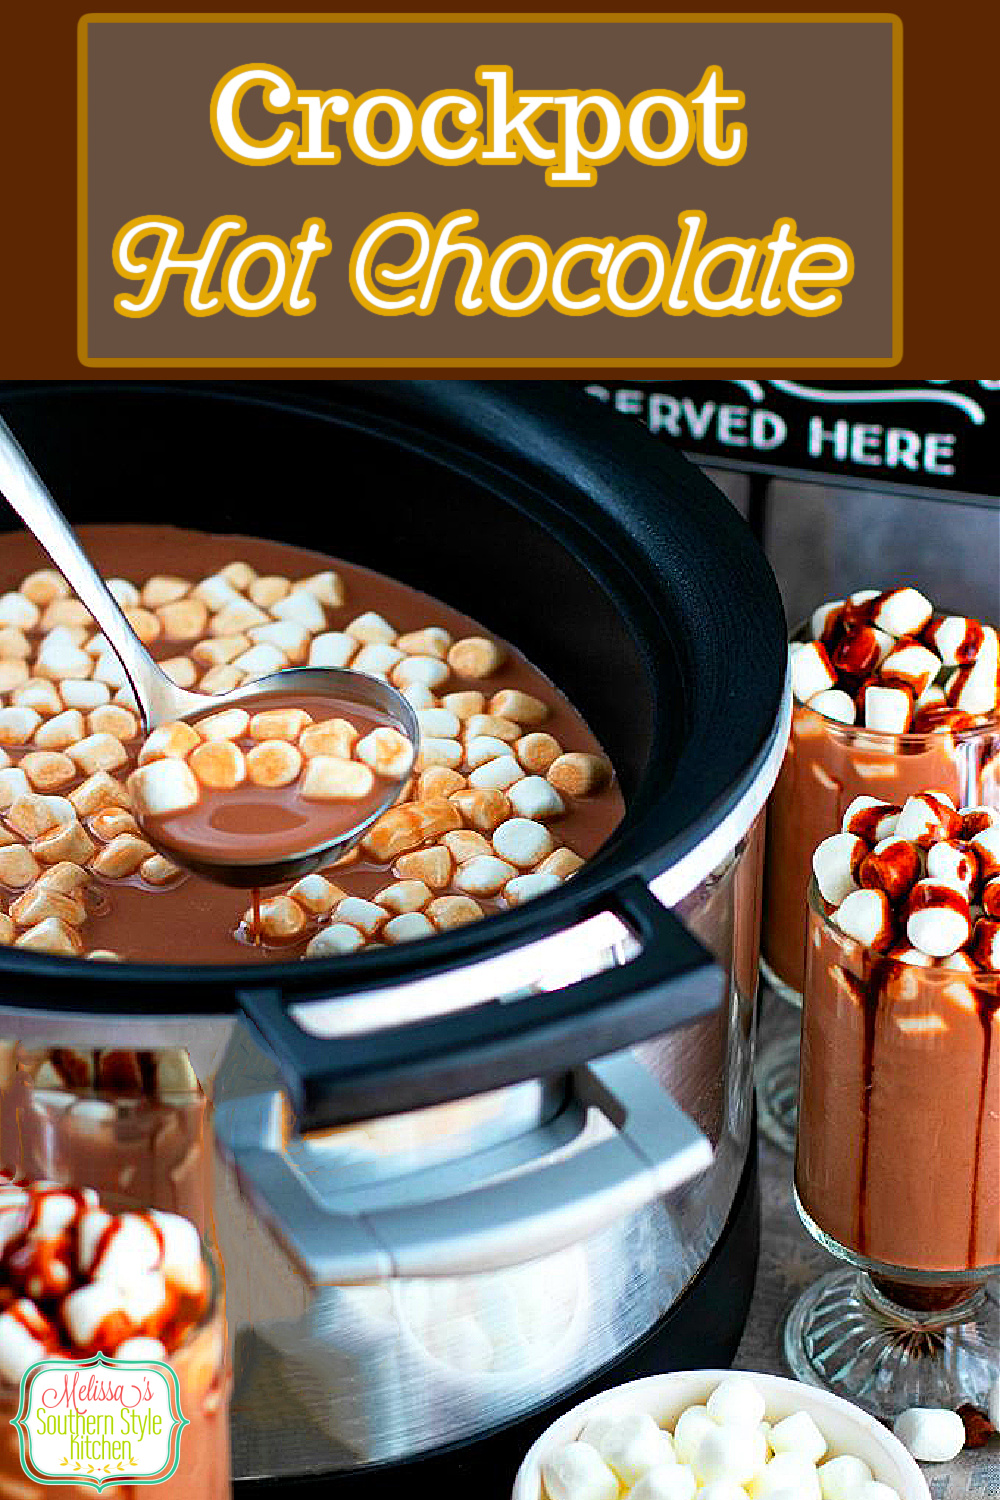 Enjoy a steamy cup of this Crockpot Hot Chocolate for a chilly day sweetfix #hotchocolate #crockpothotchocolate #slowcookerhotchocolate #hotcocoarecipes #chocolaterecipes #drinks #southernecipes